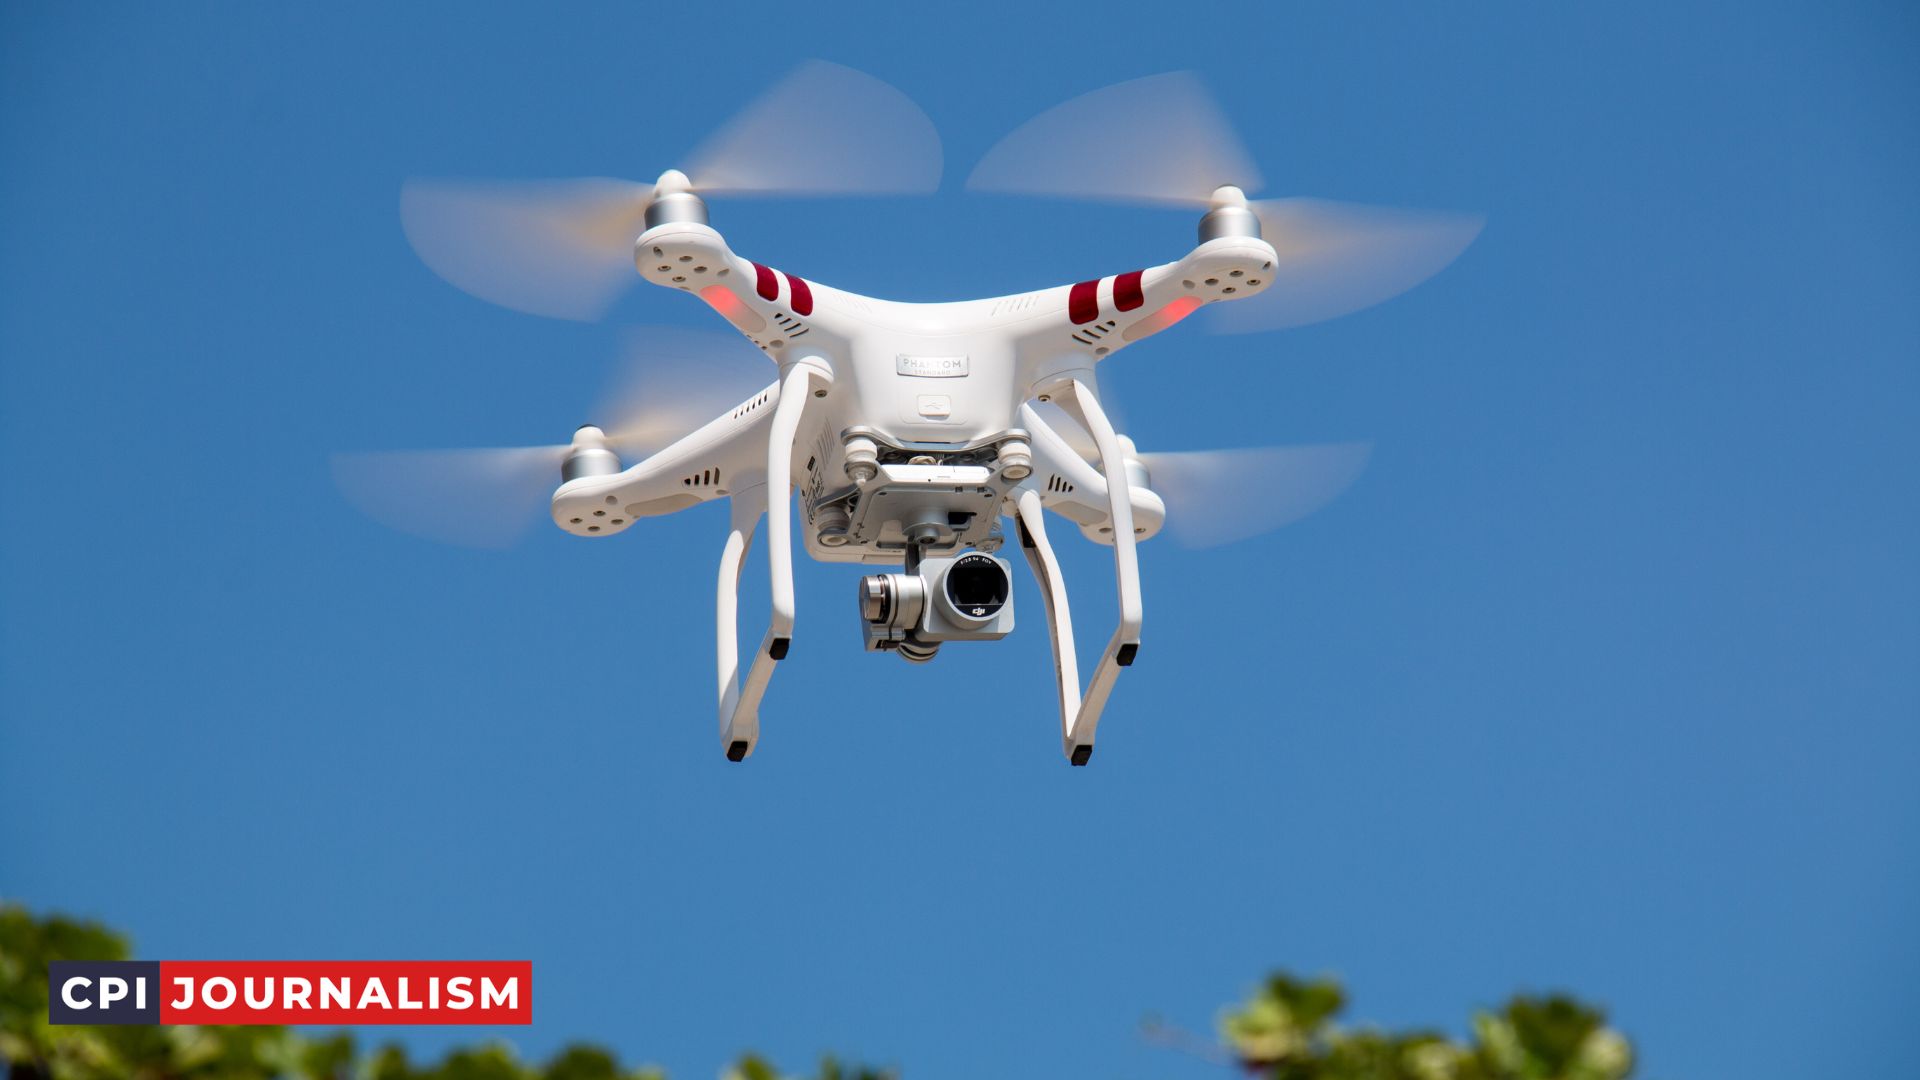 Faa Drone Rules For Journalism